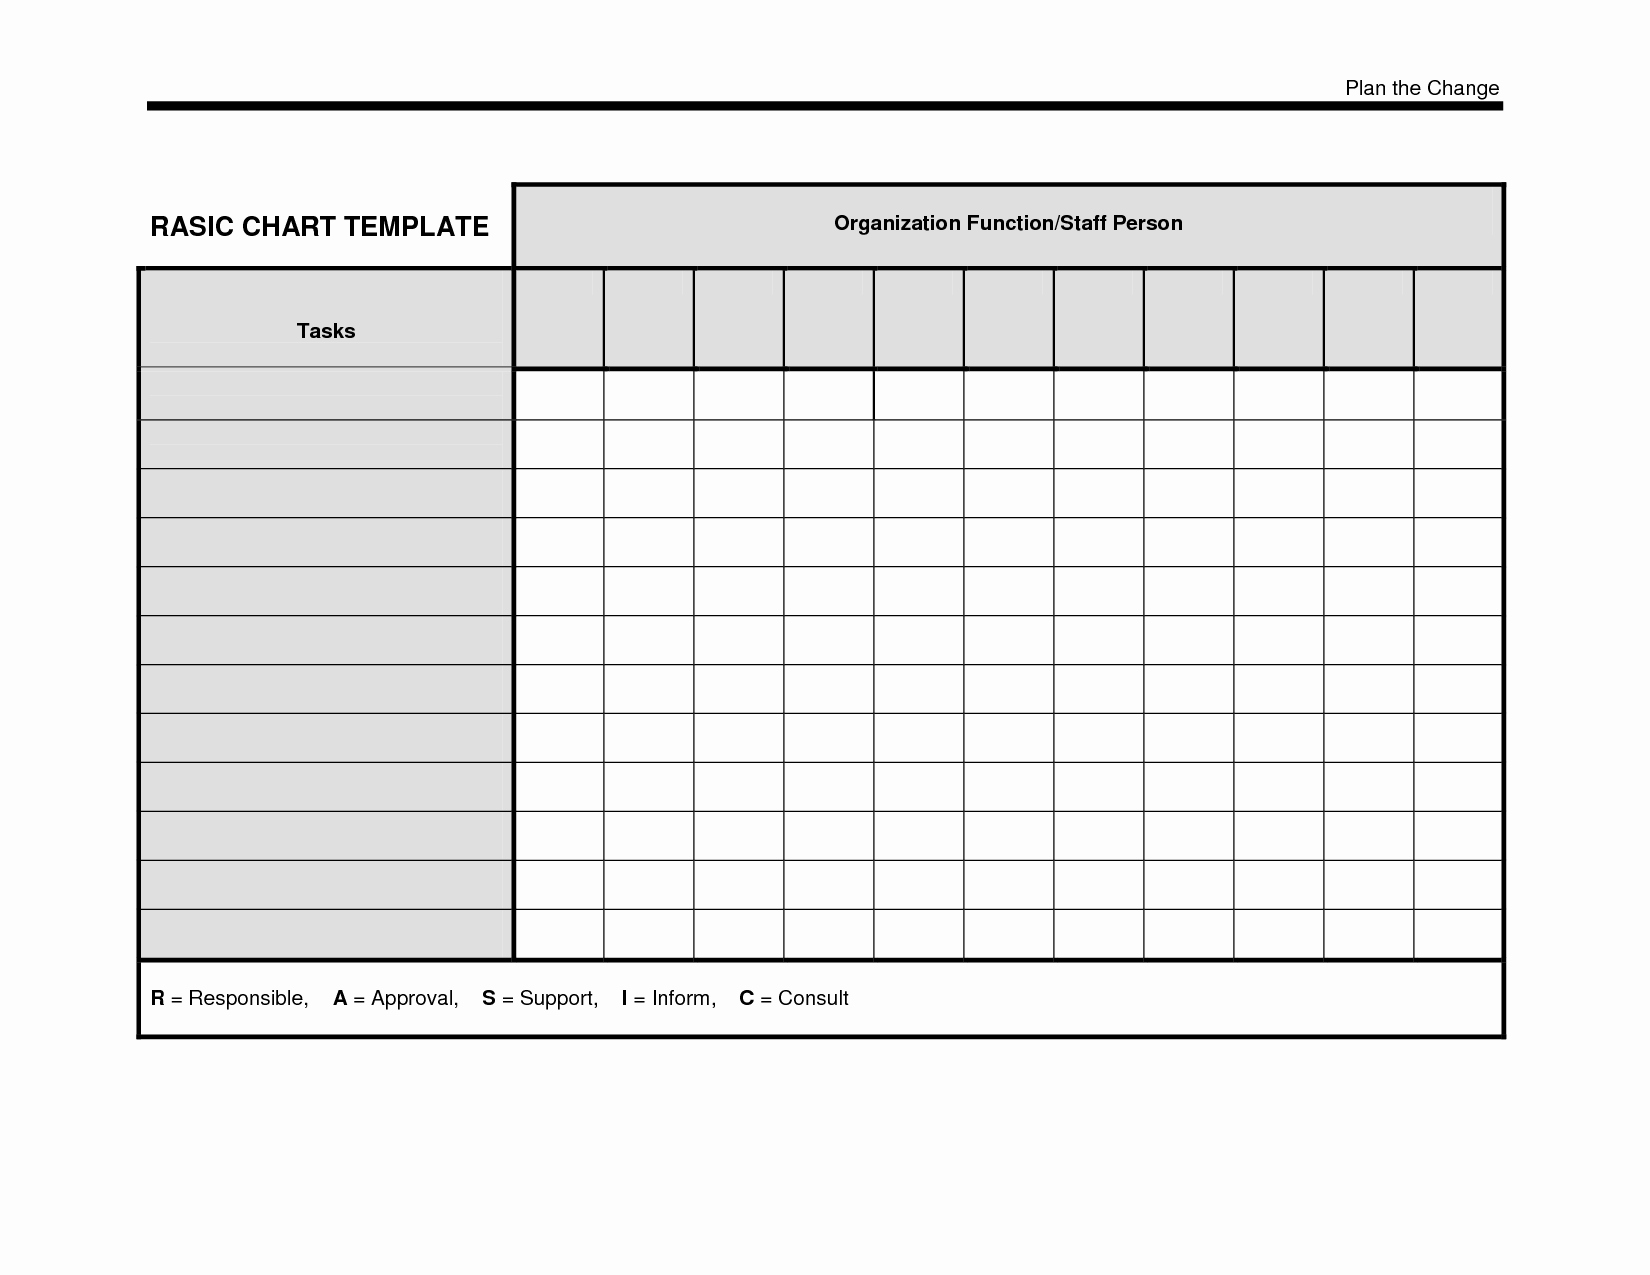 Letter of Excel Templates Organizational Chart Free Download to Excel Templates Organizational Chart Free Download Letter